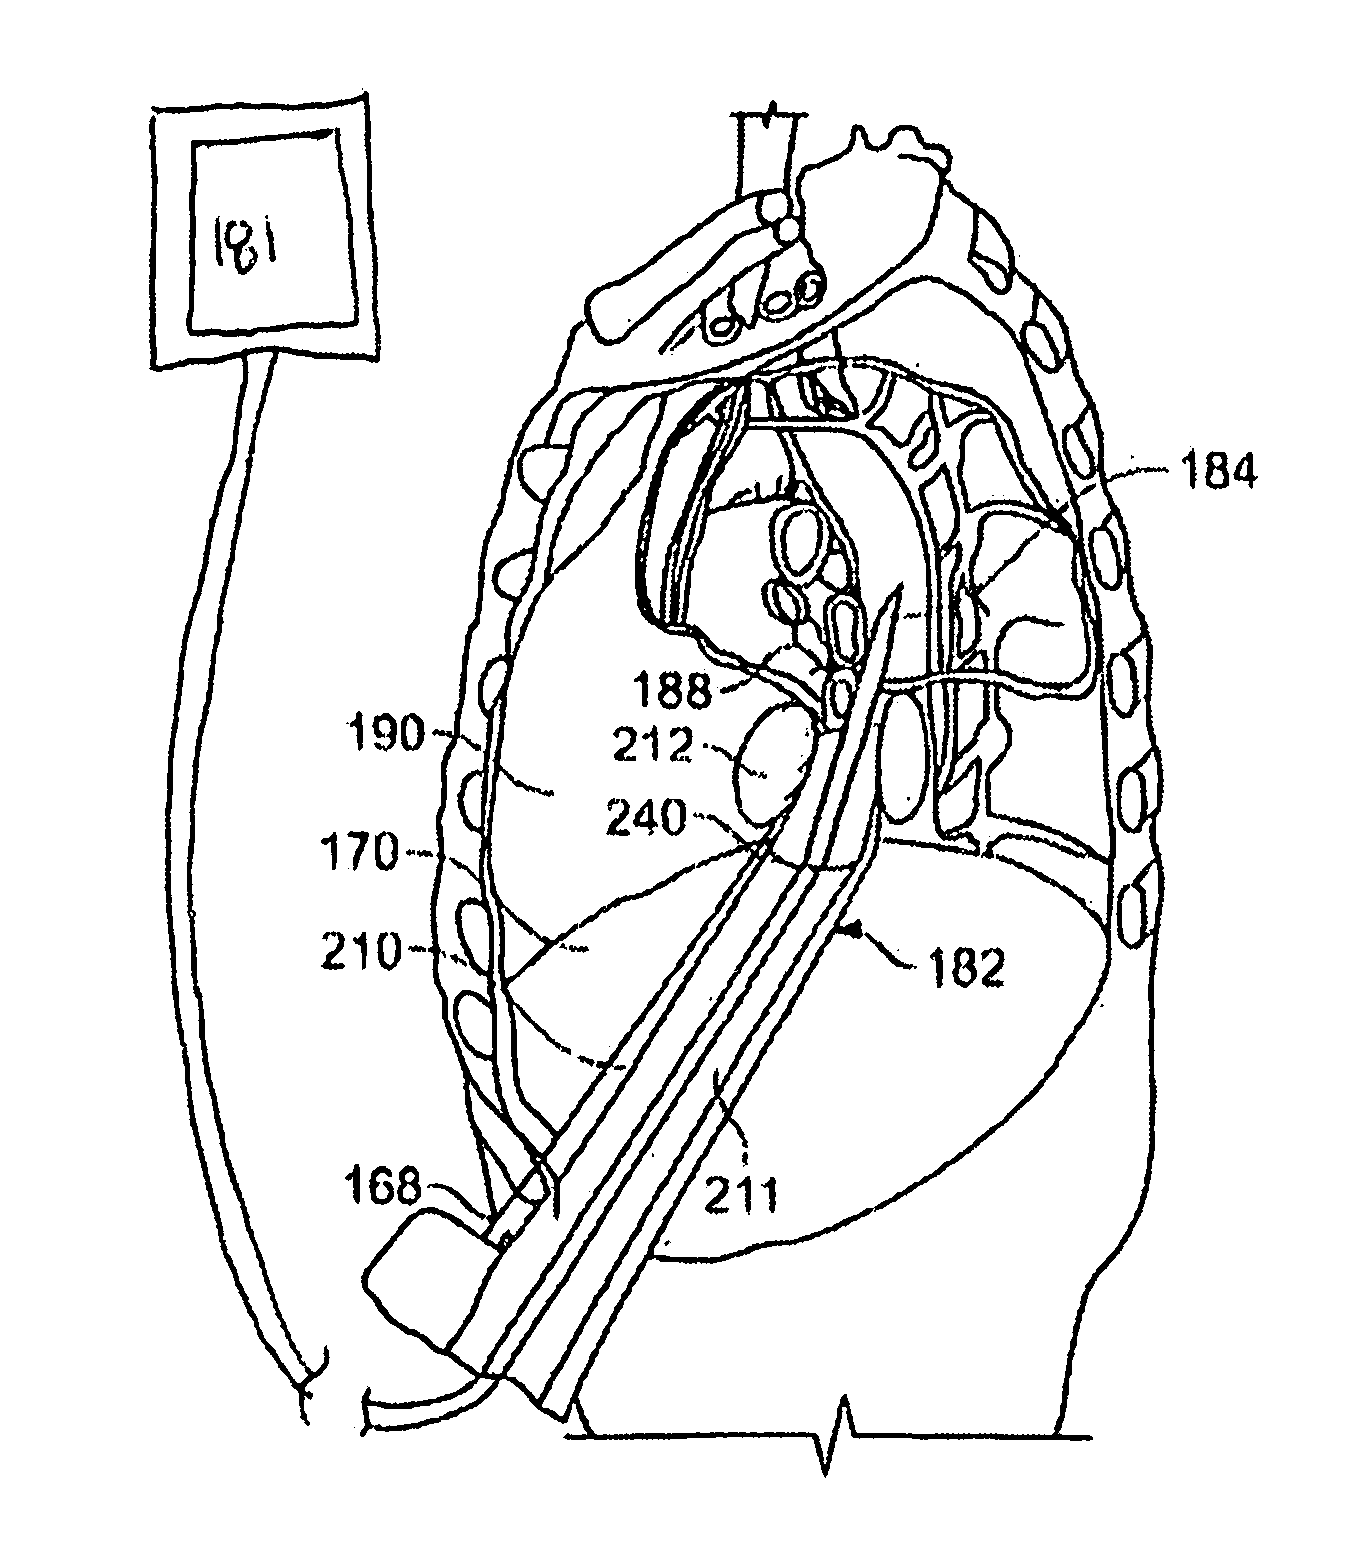 Diaphragm entry for posterior surgical access